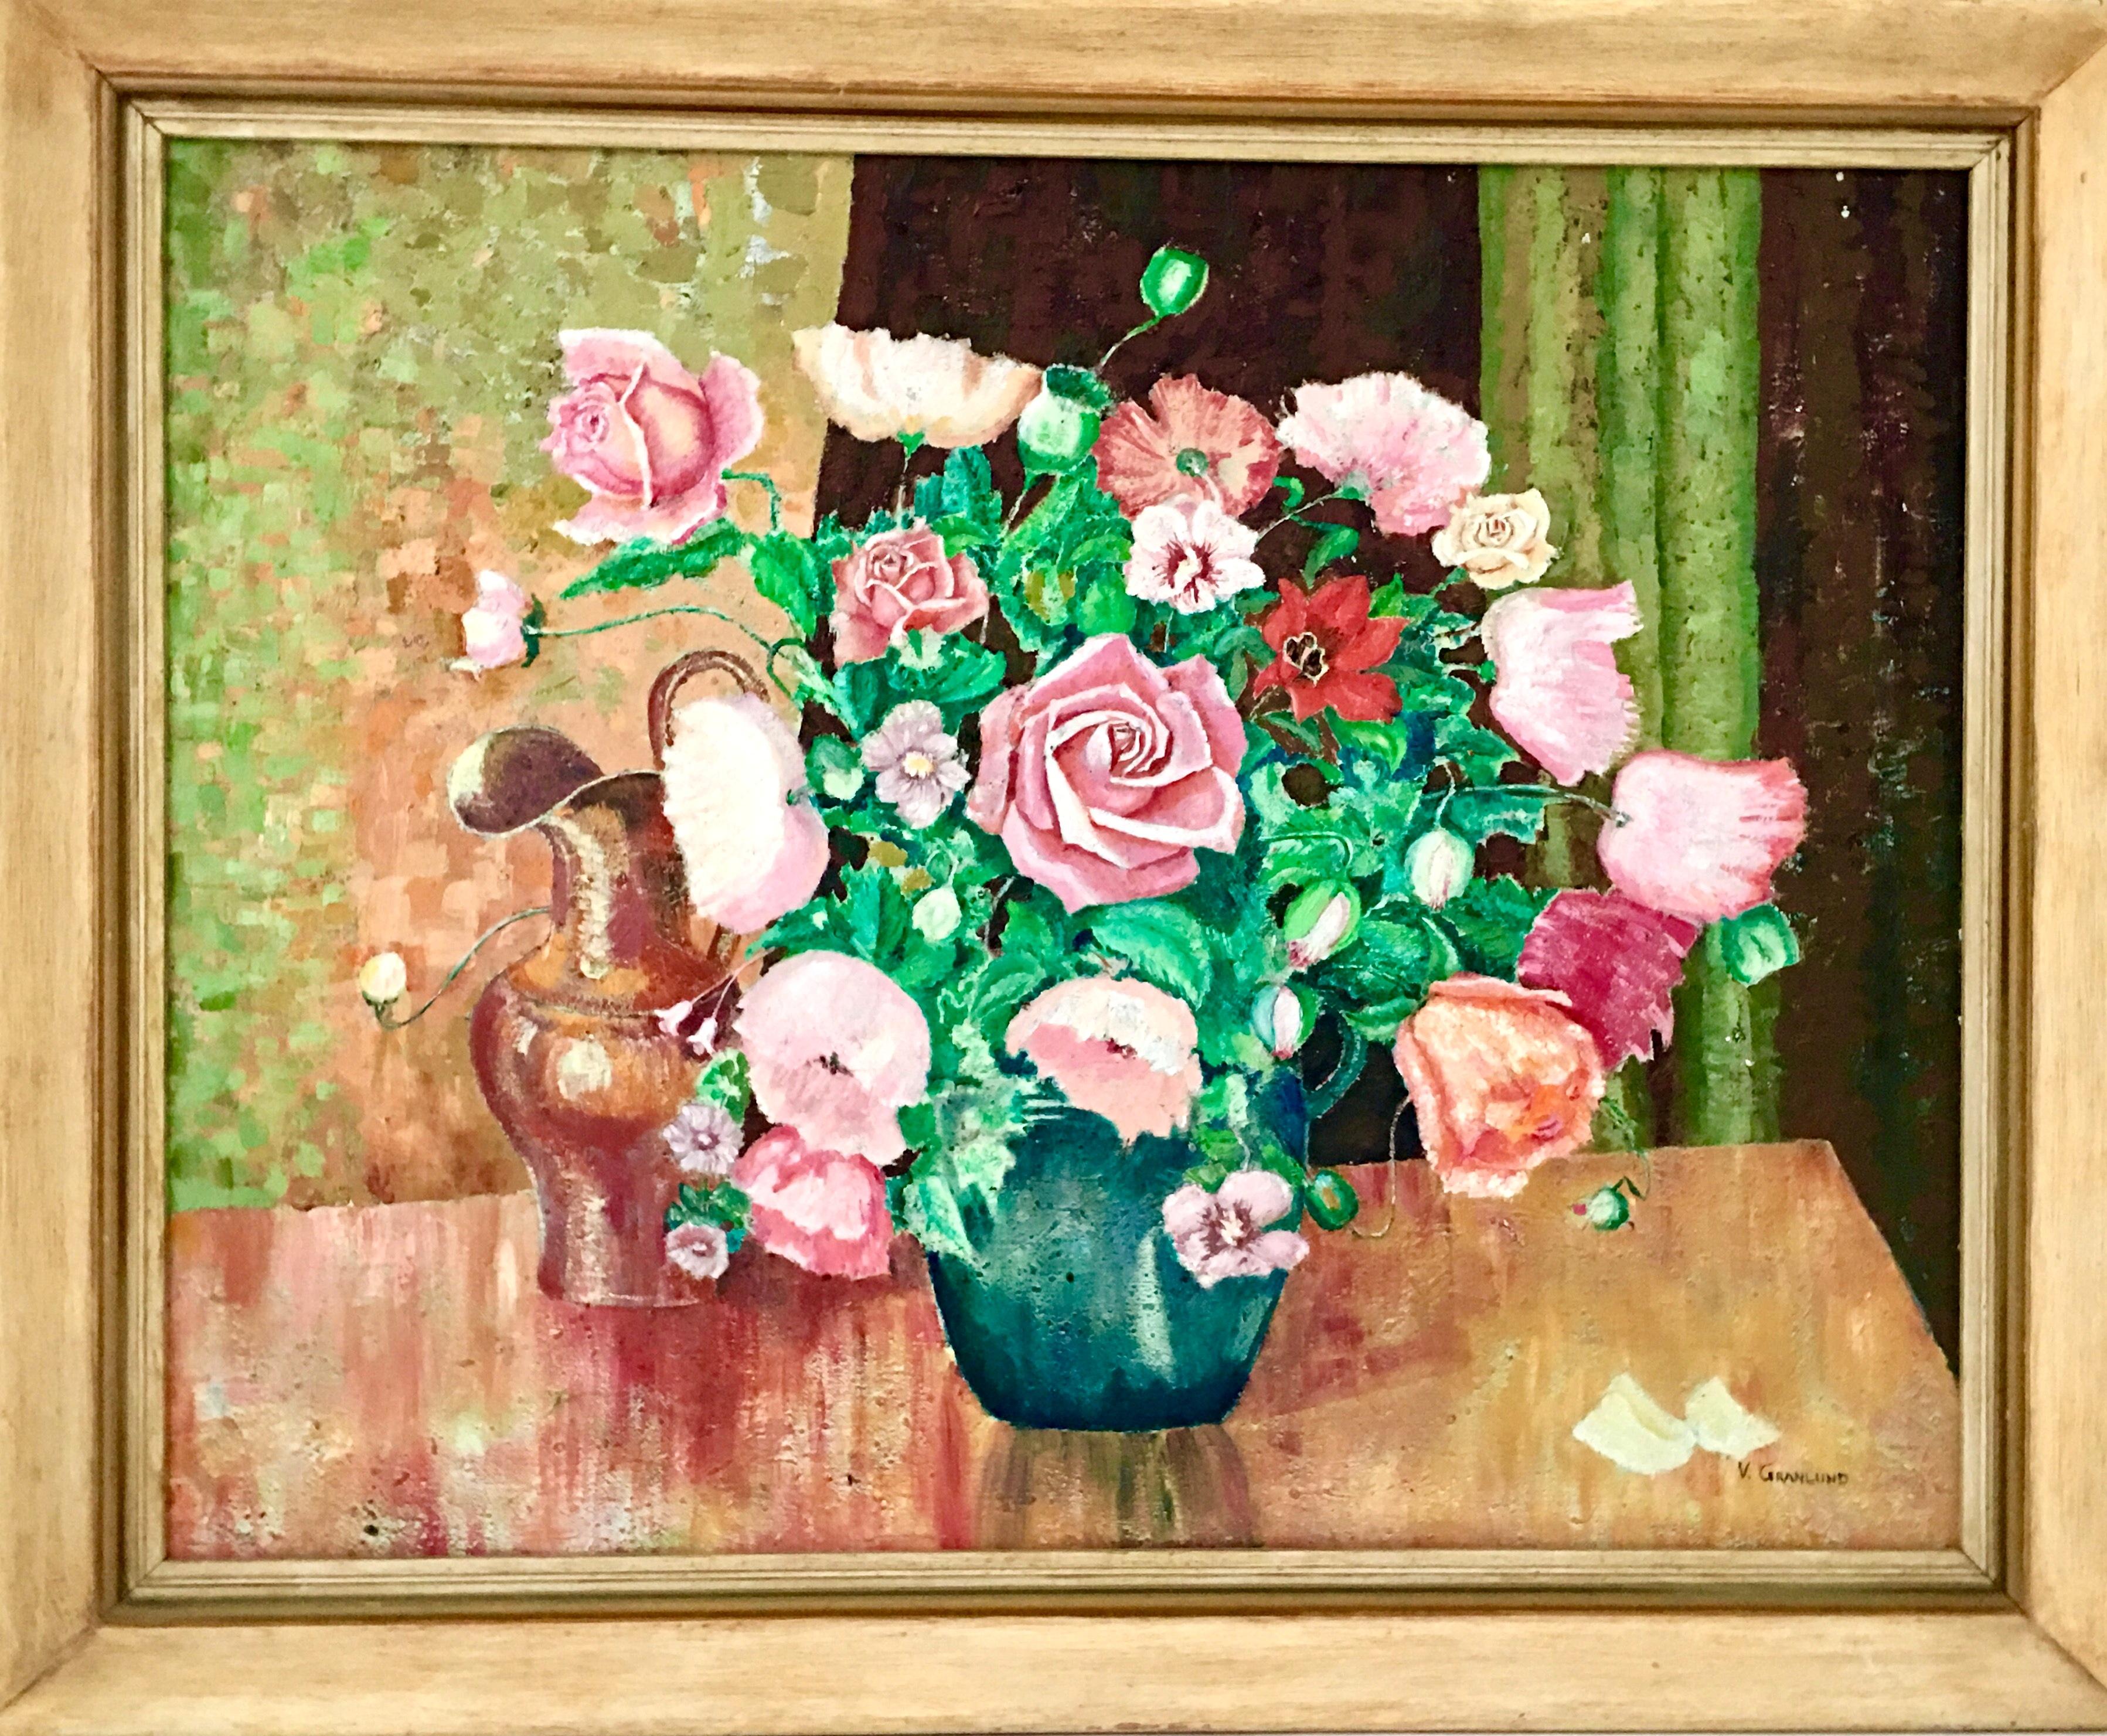 20th Century Original Oil On Canvas Painting By, V. Granland. This still life work of art features a textured technique and depicts a vase of flowers on a table executed in bright green, pink and coral.  Artist signed lower right, V. Granland. 